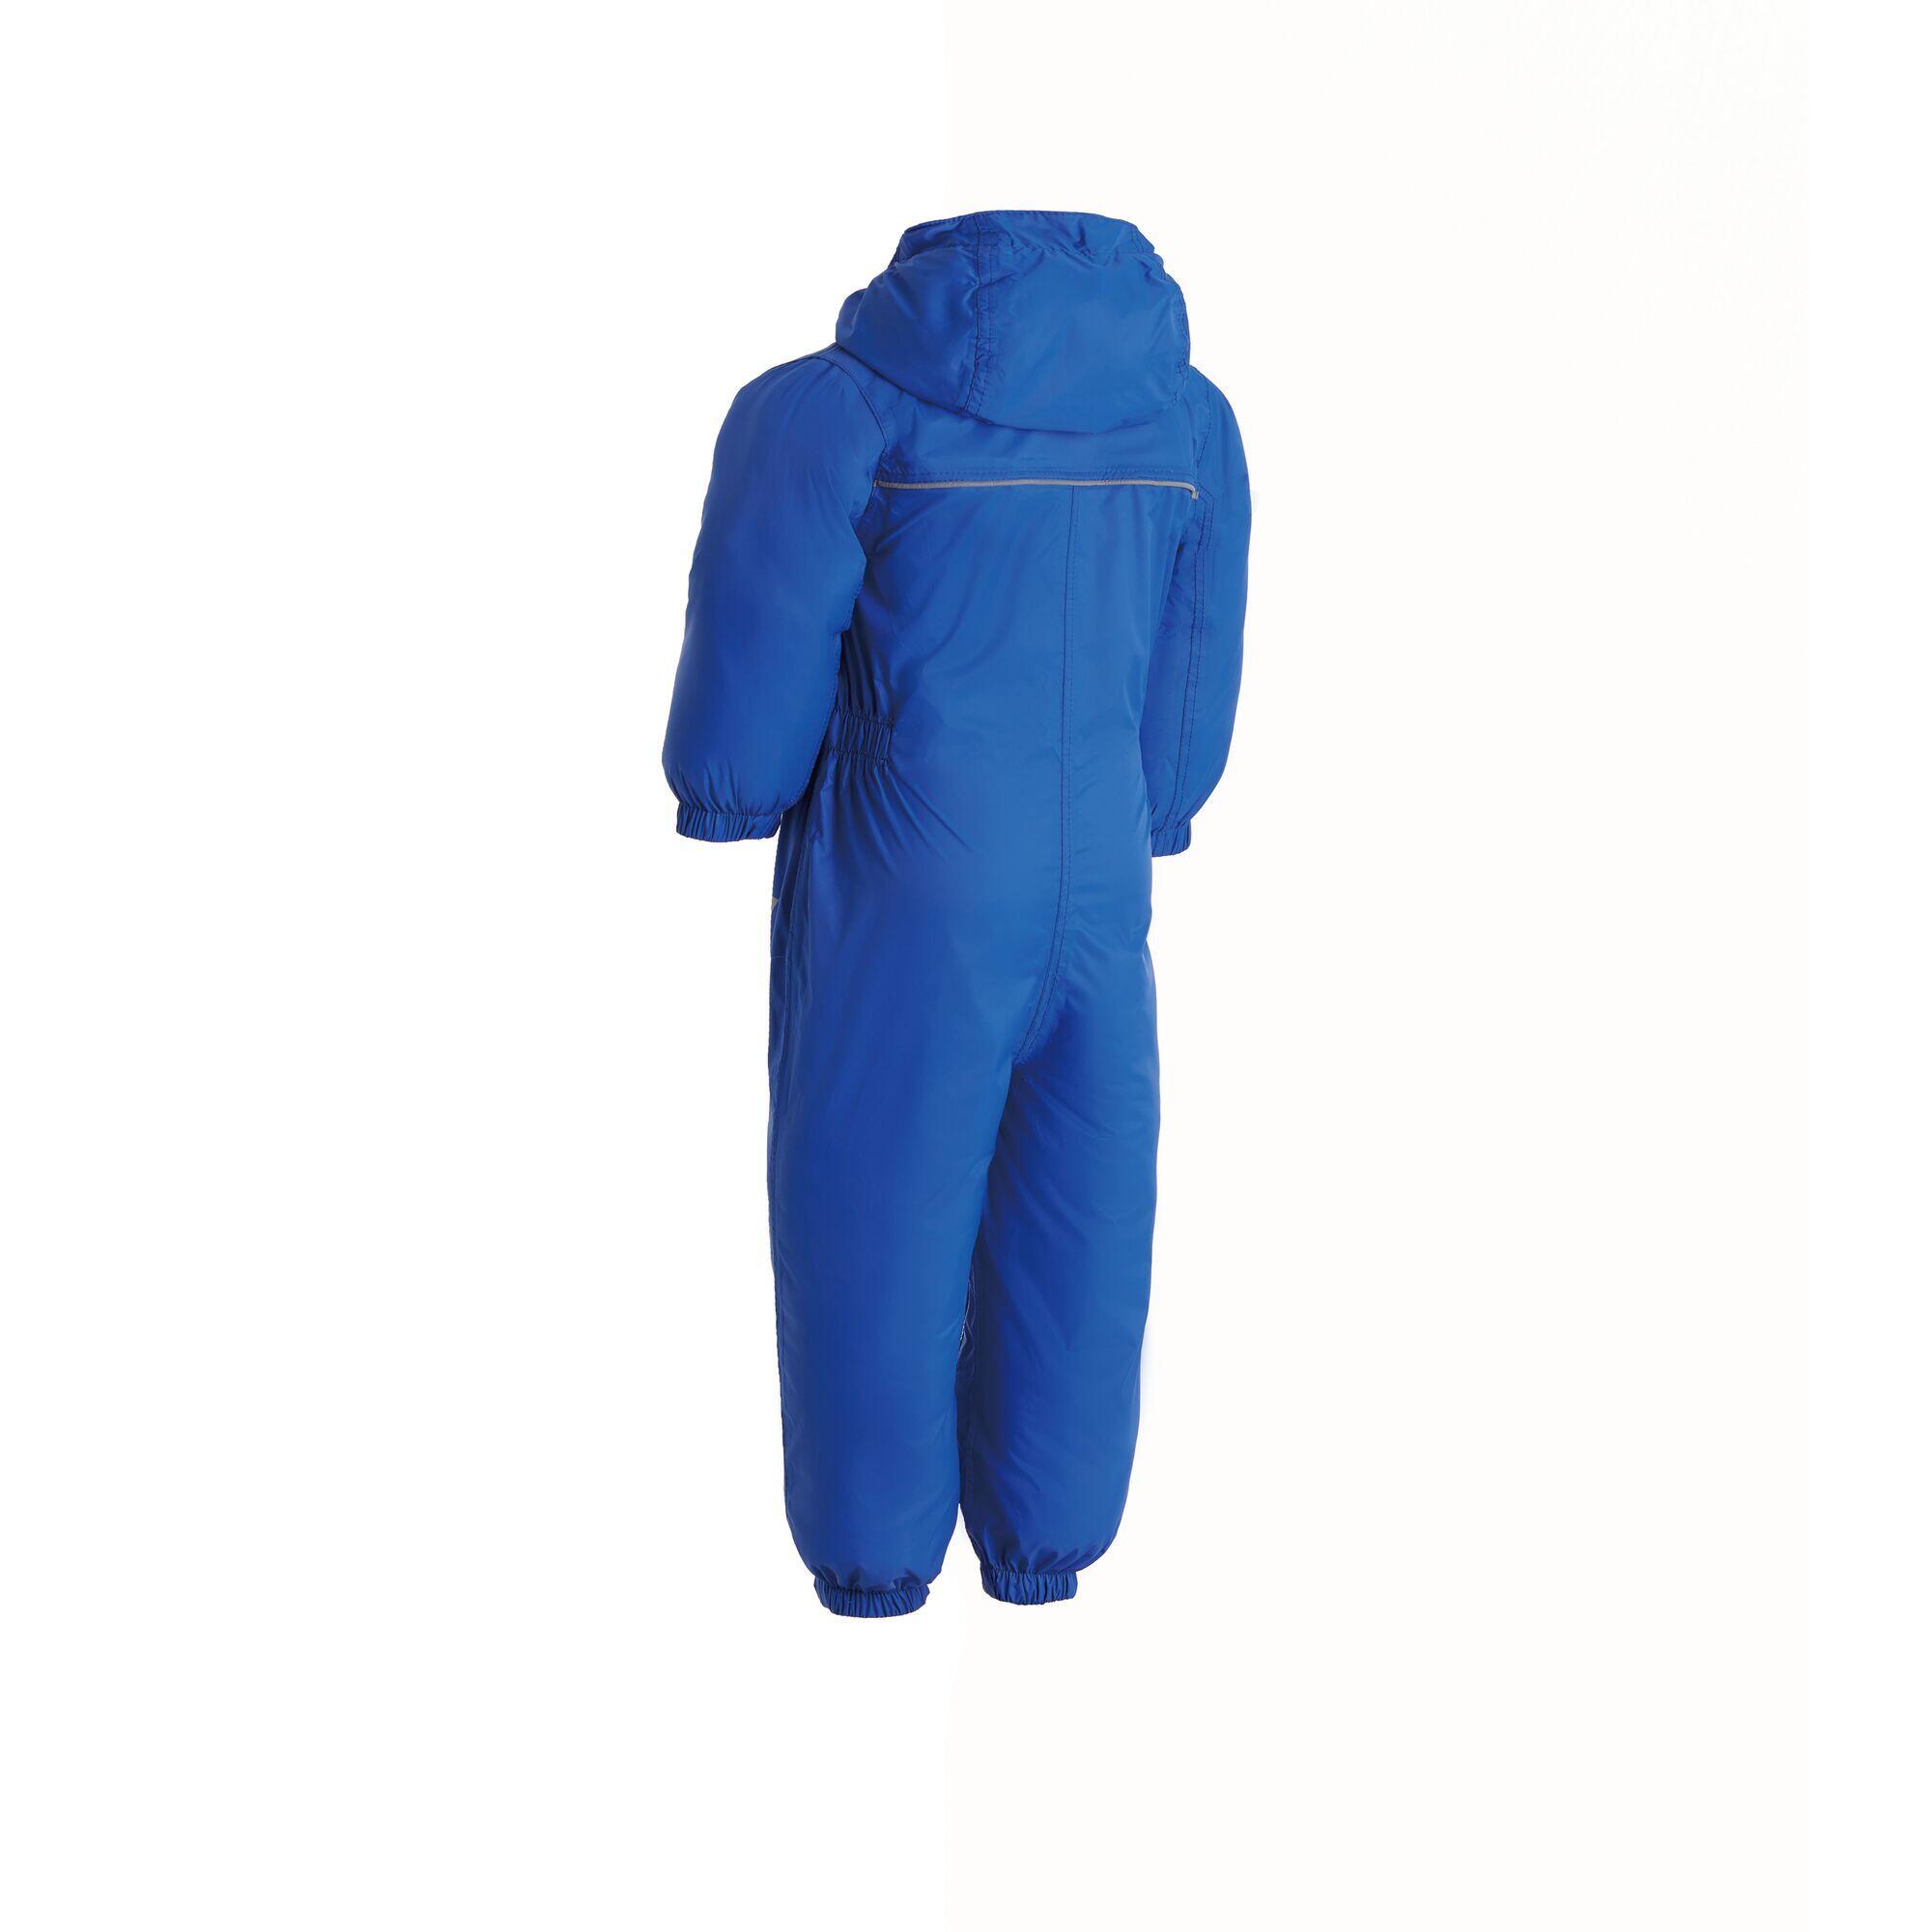 Great Outdoors Childrens Toddlers Puddle IV Waterproof Rainsuit (Oxford Blue) 2/5